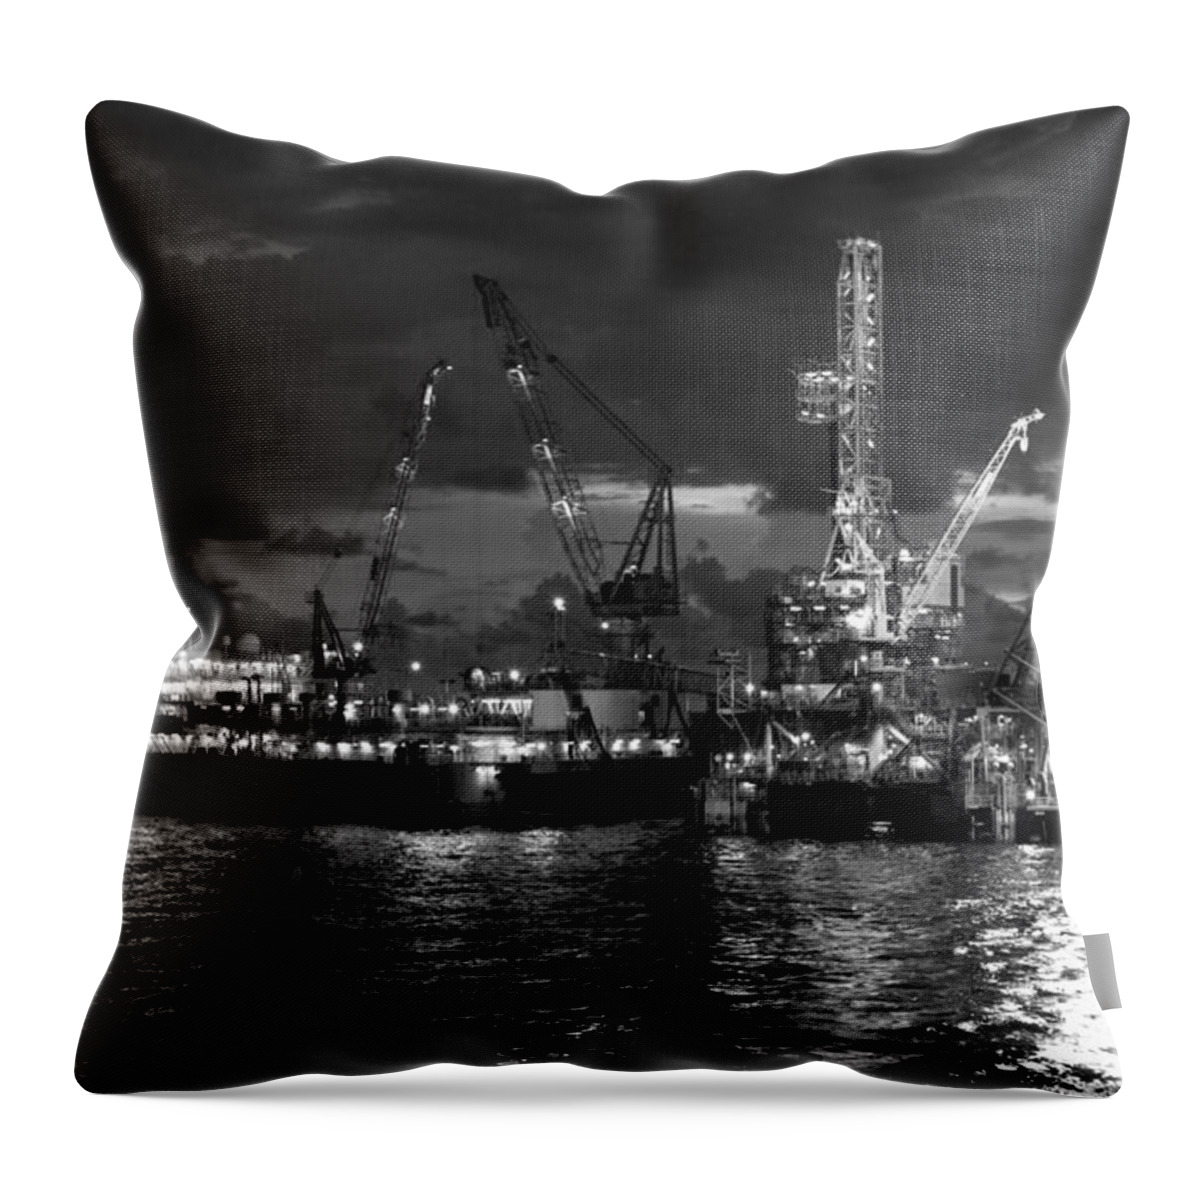 Screensaver Throw Pillow featuring the photograph Hess West Esperanza Rig by Gregory Daley MPSA